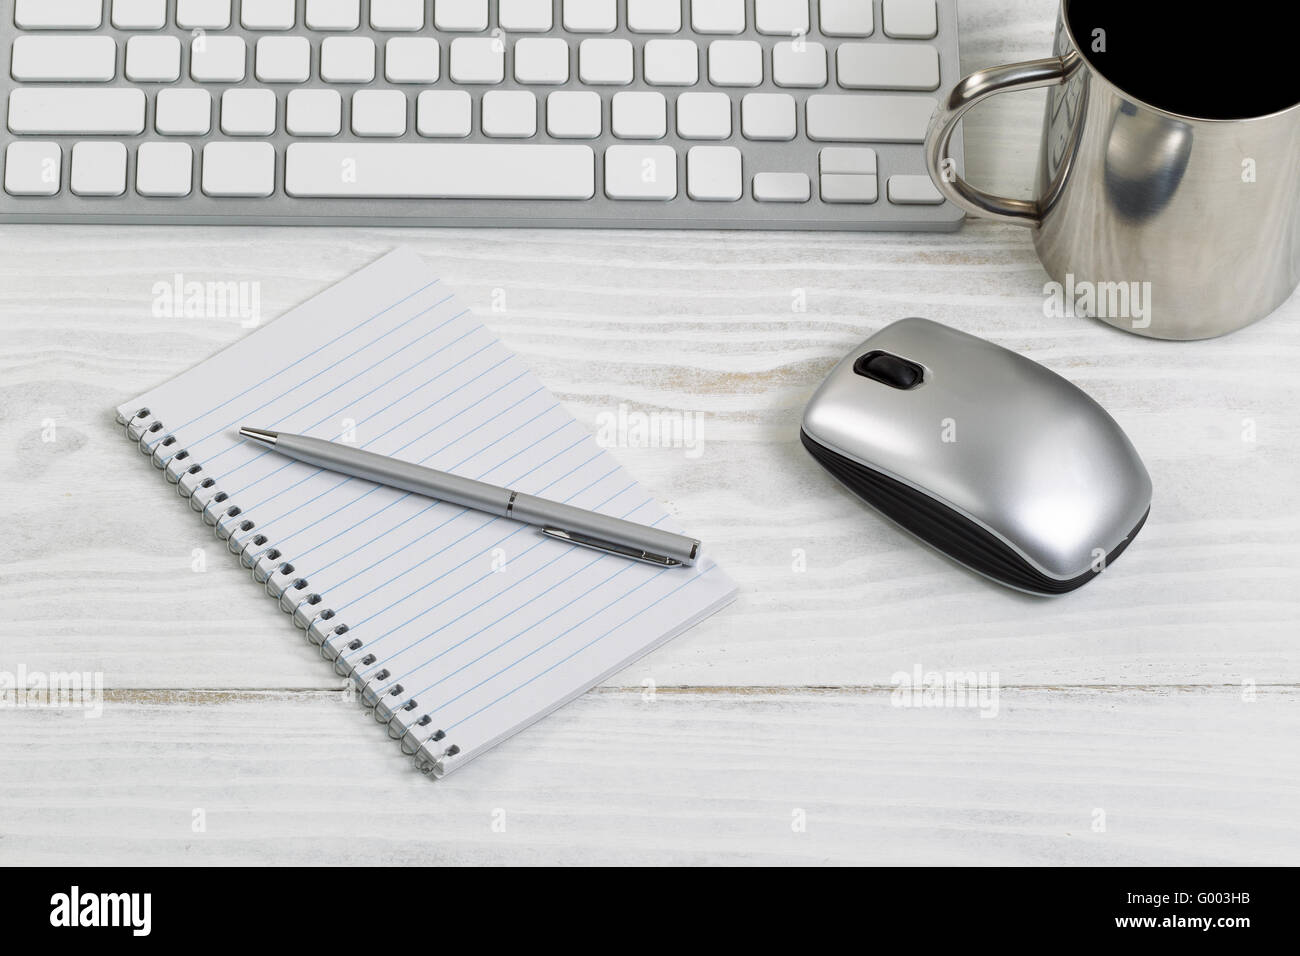 White desktop with daily work objects Stock Photo